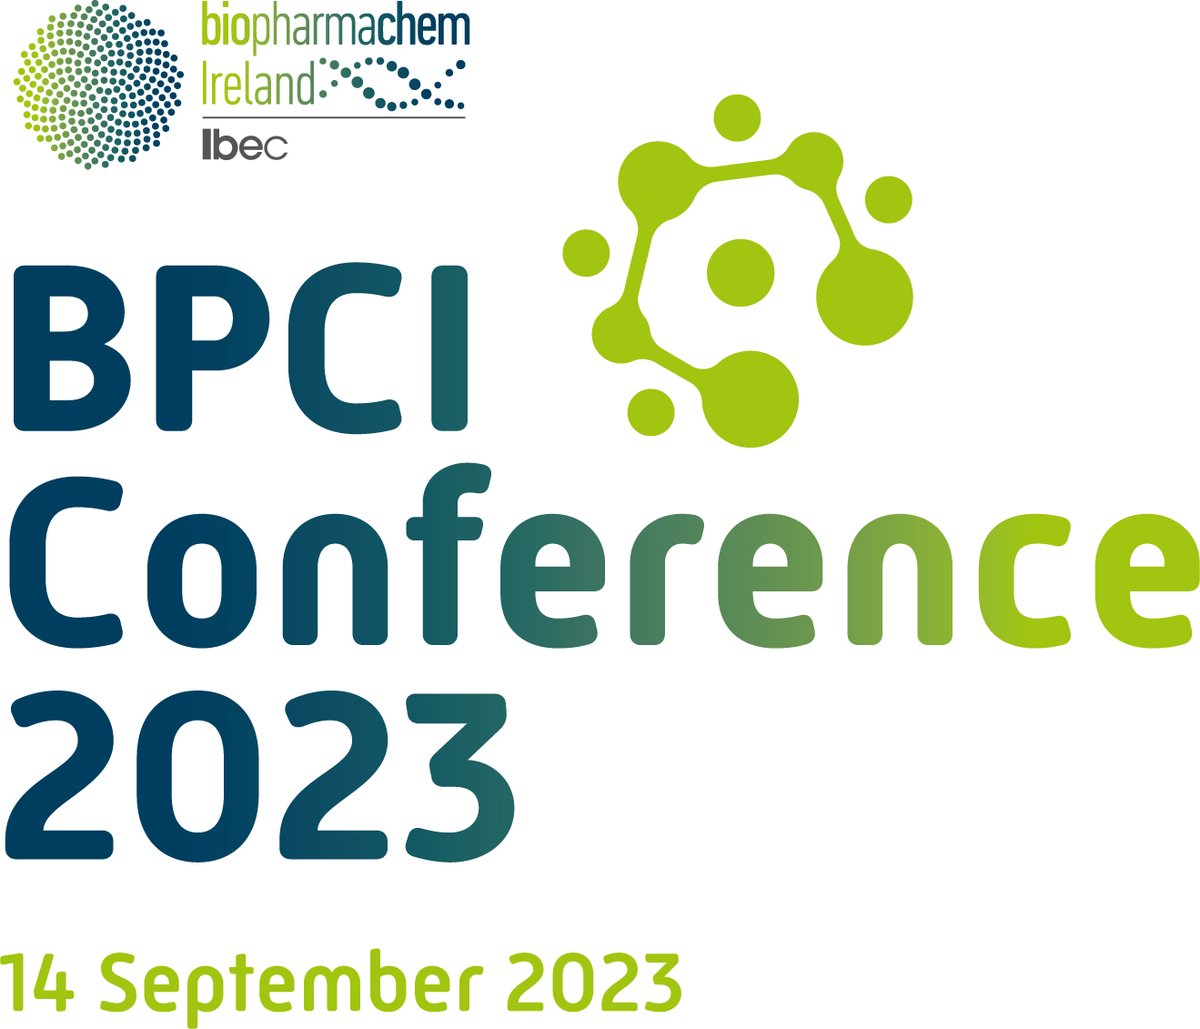 The FDA and HPRA discussing their respective approaches to regulatory innovation #BPCI2024 Ireland has an exemplary compliance record with regulatory agencies like the @FDA and @EMA, who collaborate and work closely with @HPRA achieve trouble-free compliance